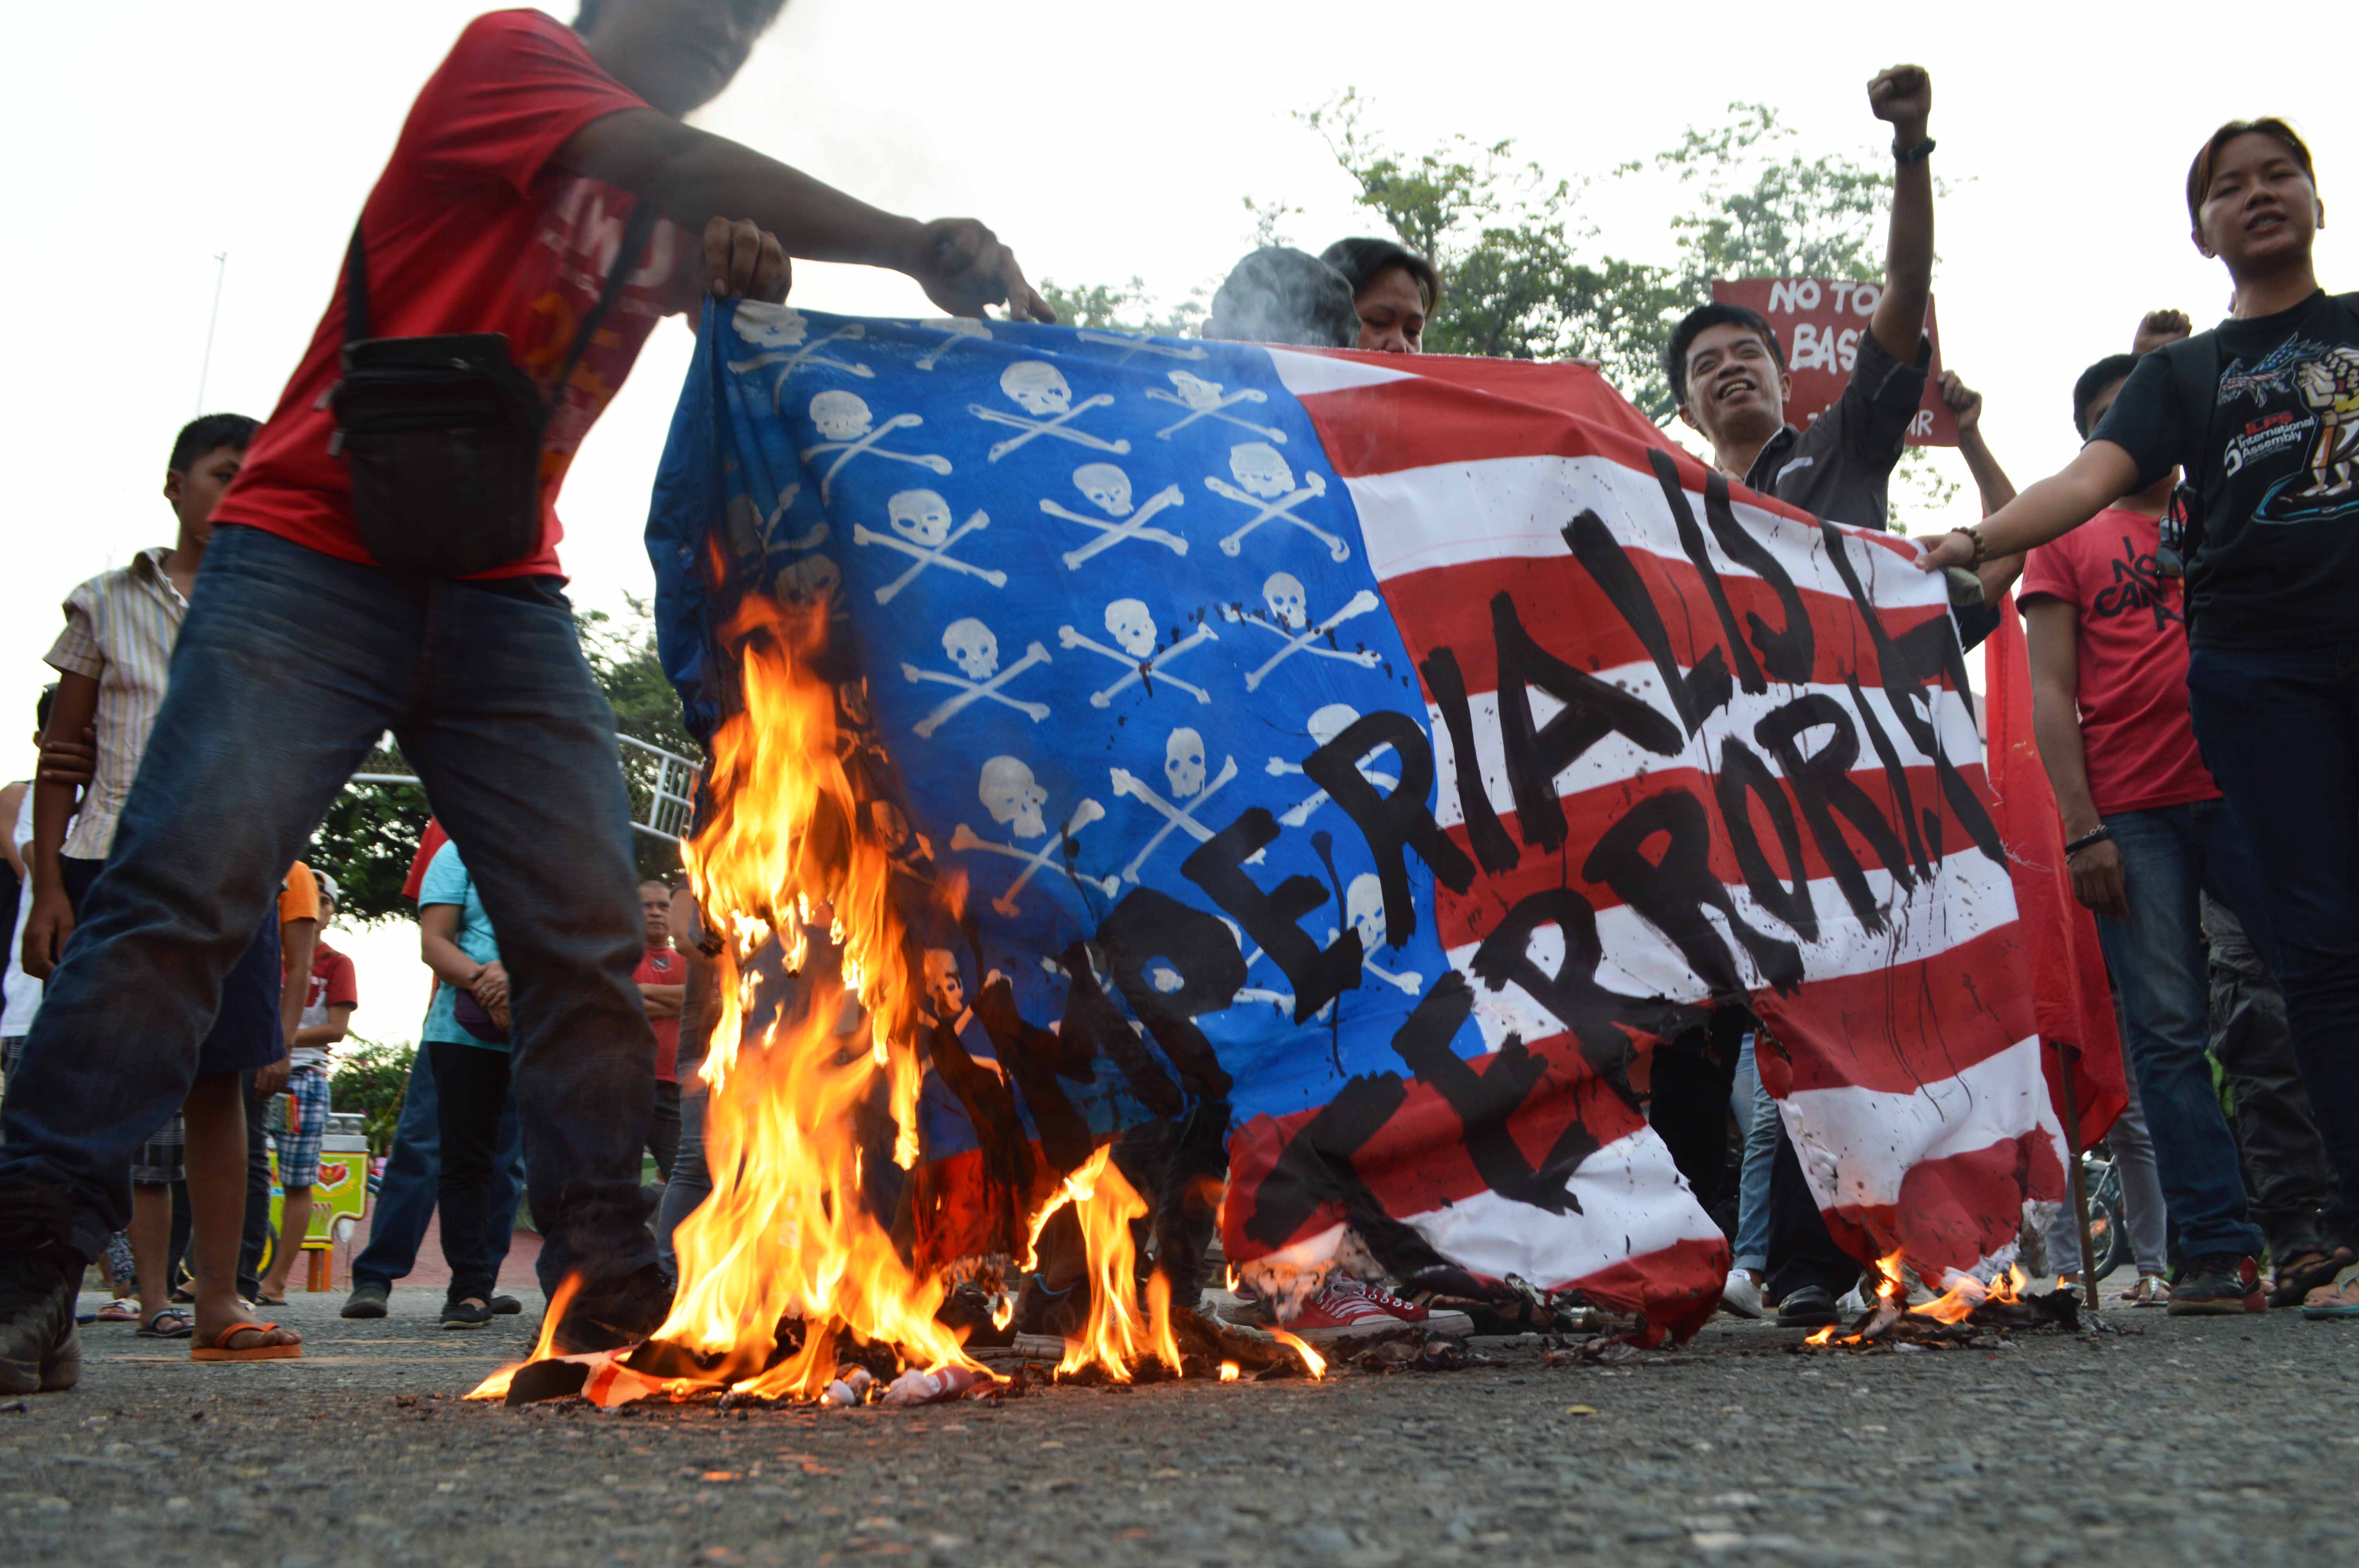 Davao City protesters burn a US flag to.protest its war on terror.